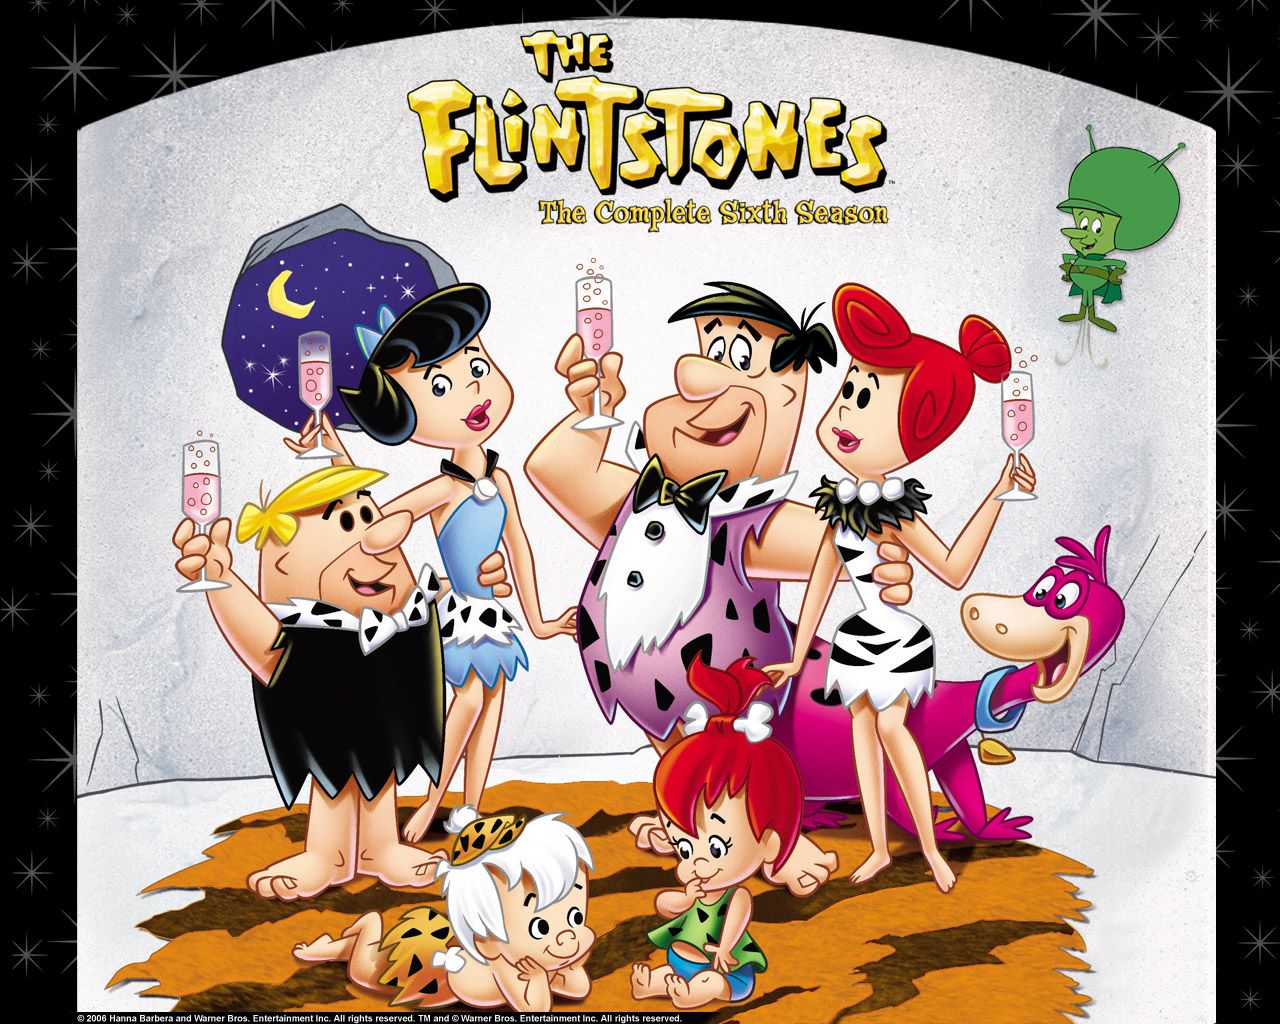 Do You Know The Flintstones Theme Song? | PlayBuzz